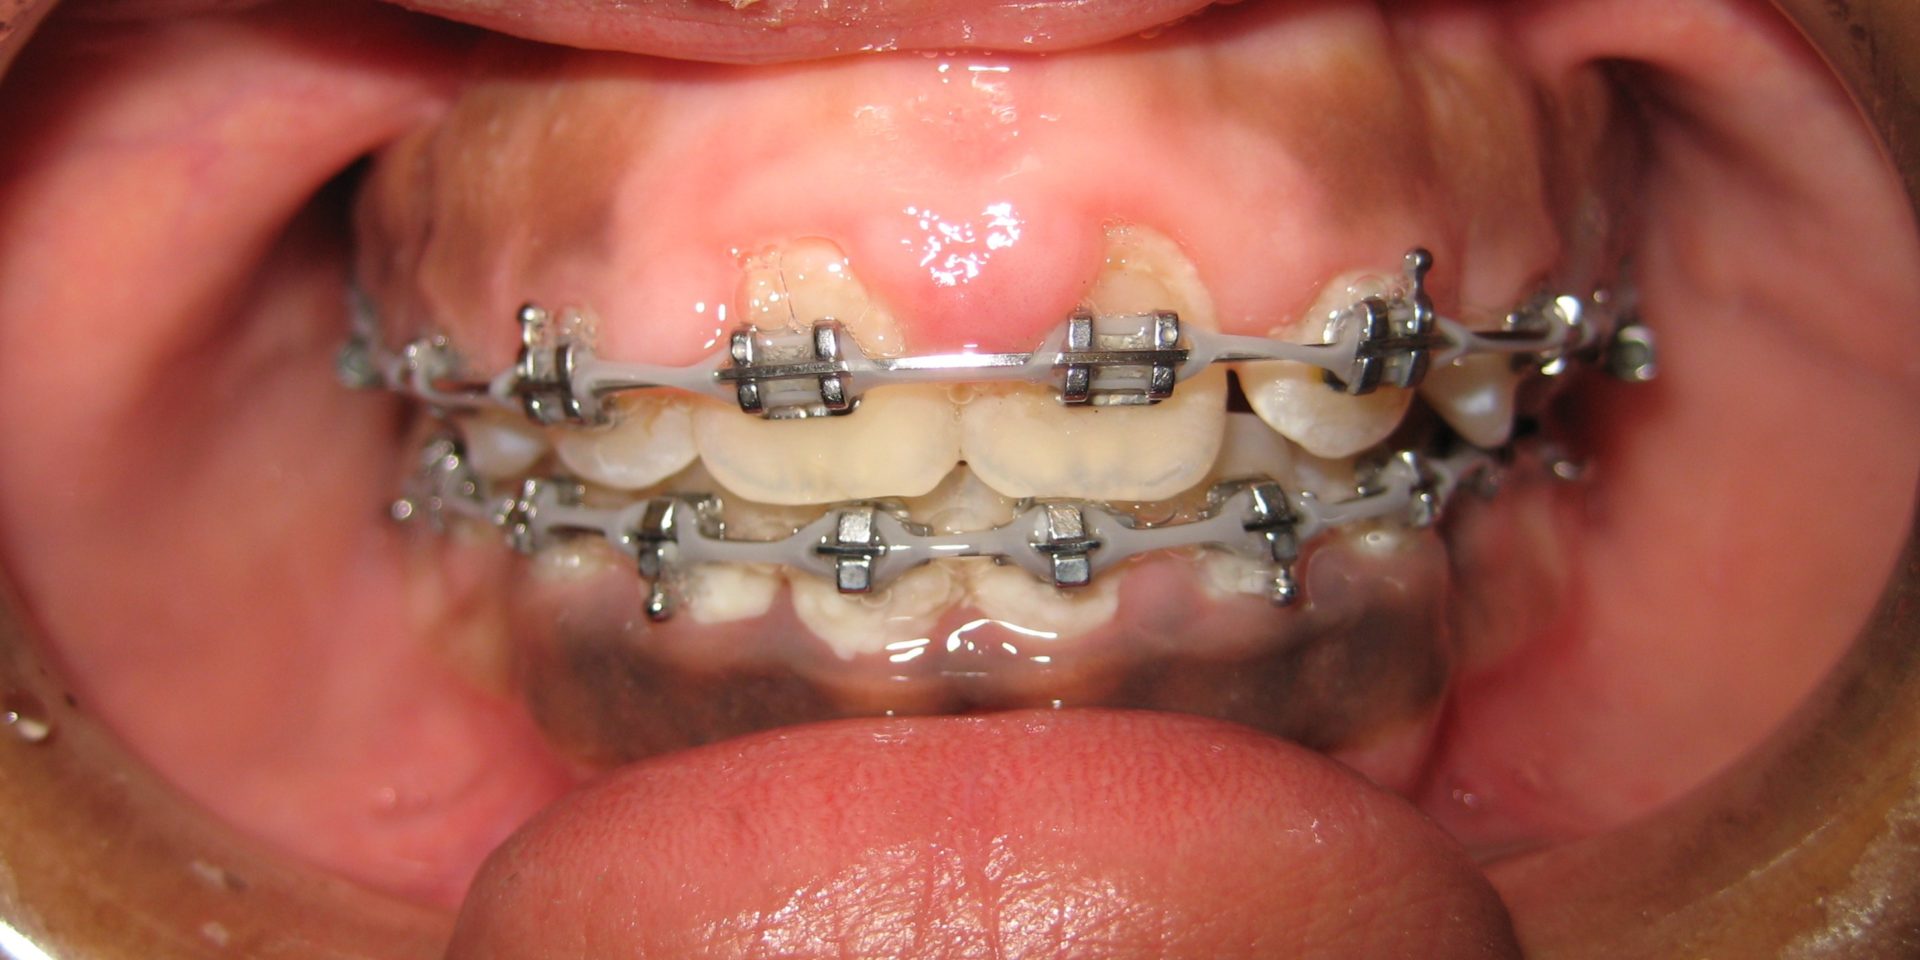 Swollen Gums with Braces: Causes and Treatments